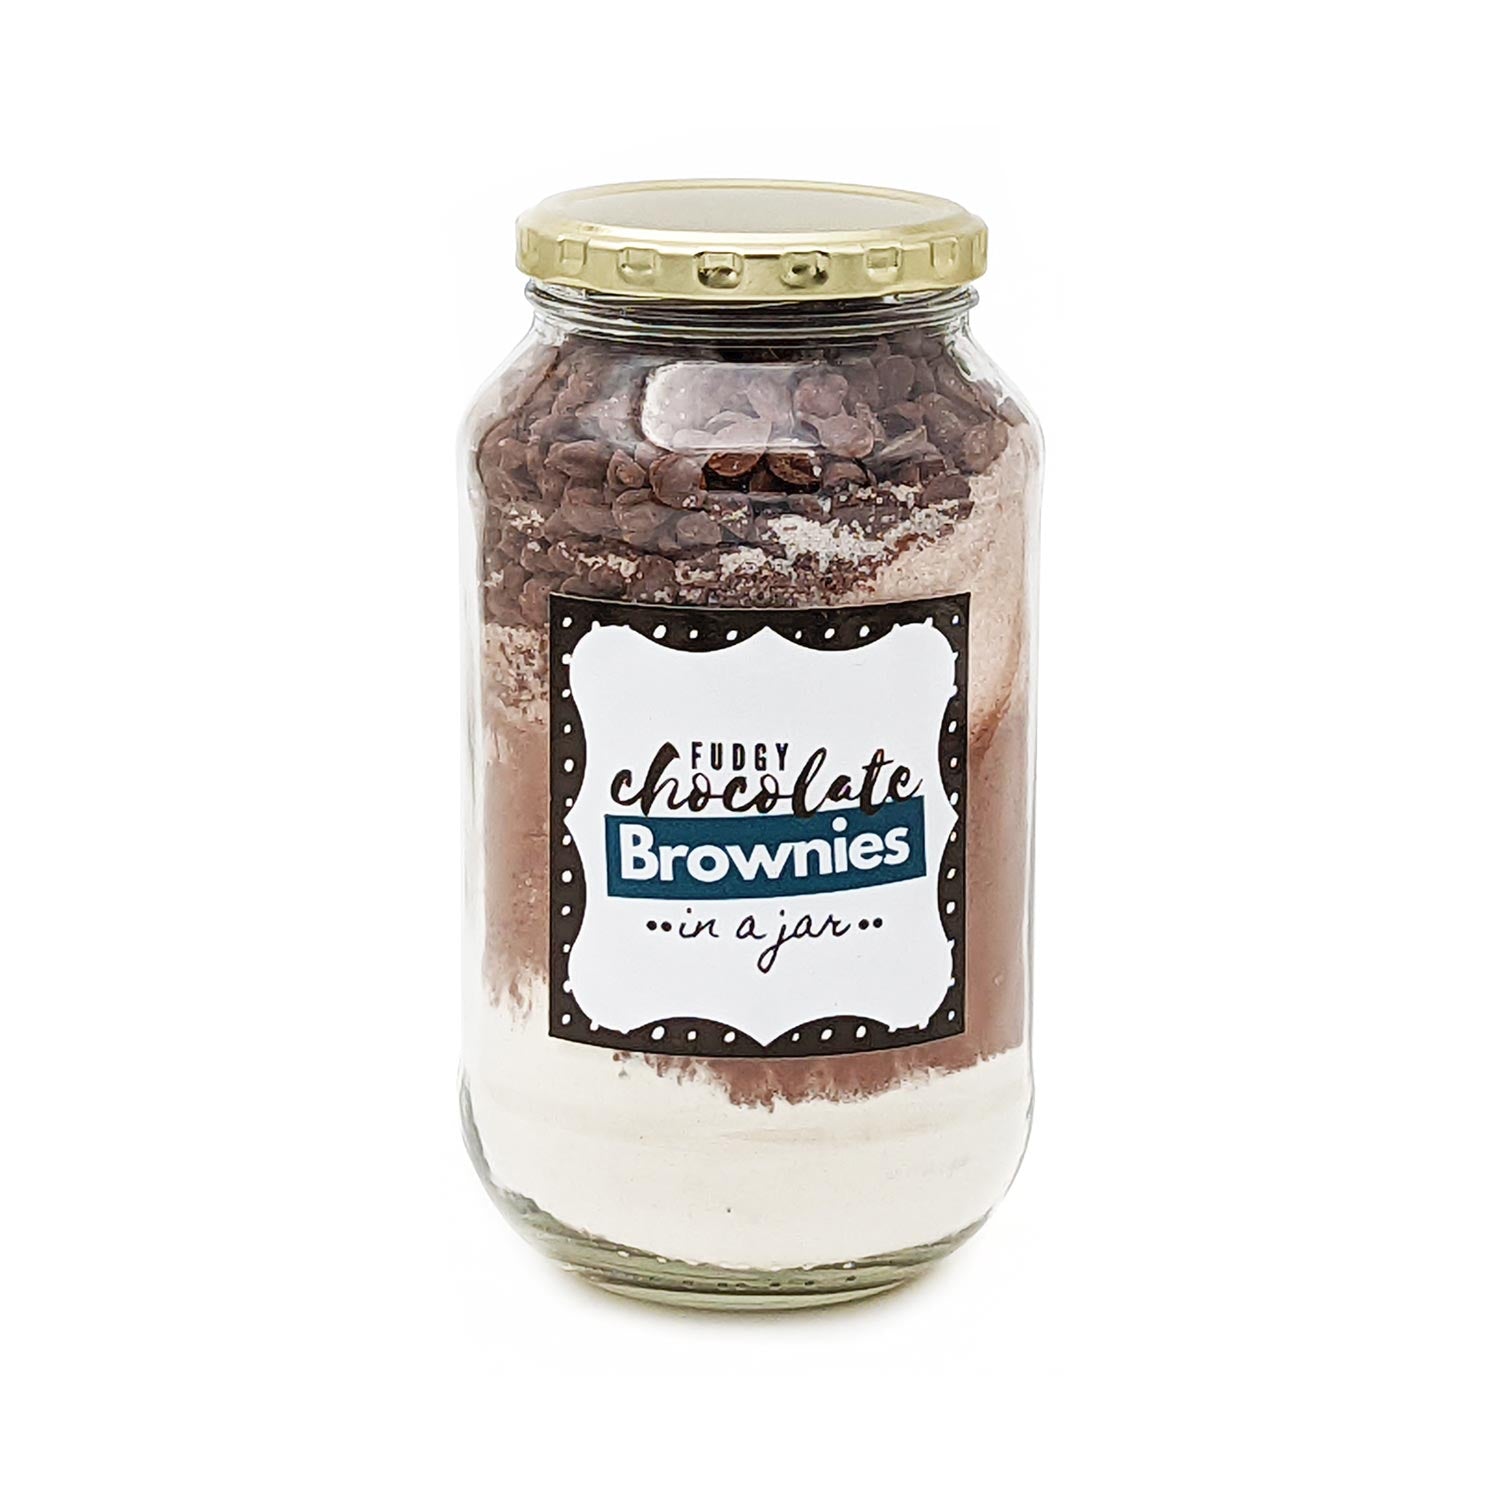 Gifts in a Jar Fudgy Chocolate Brownies Chocolate Gifts in a Jar